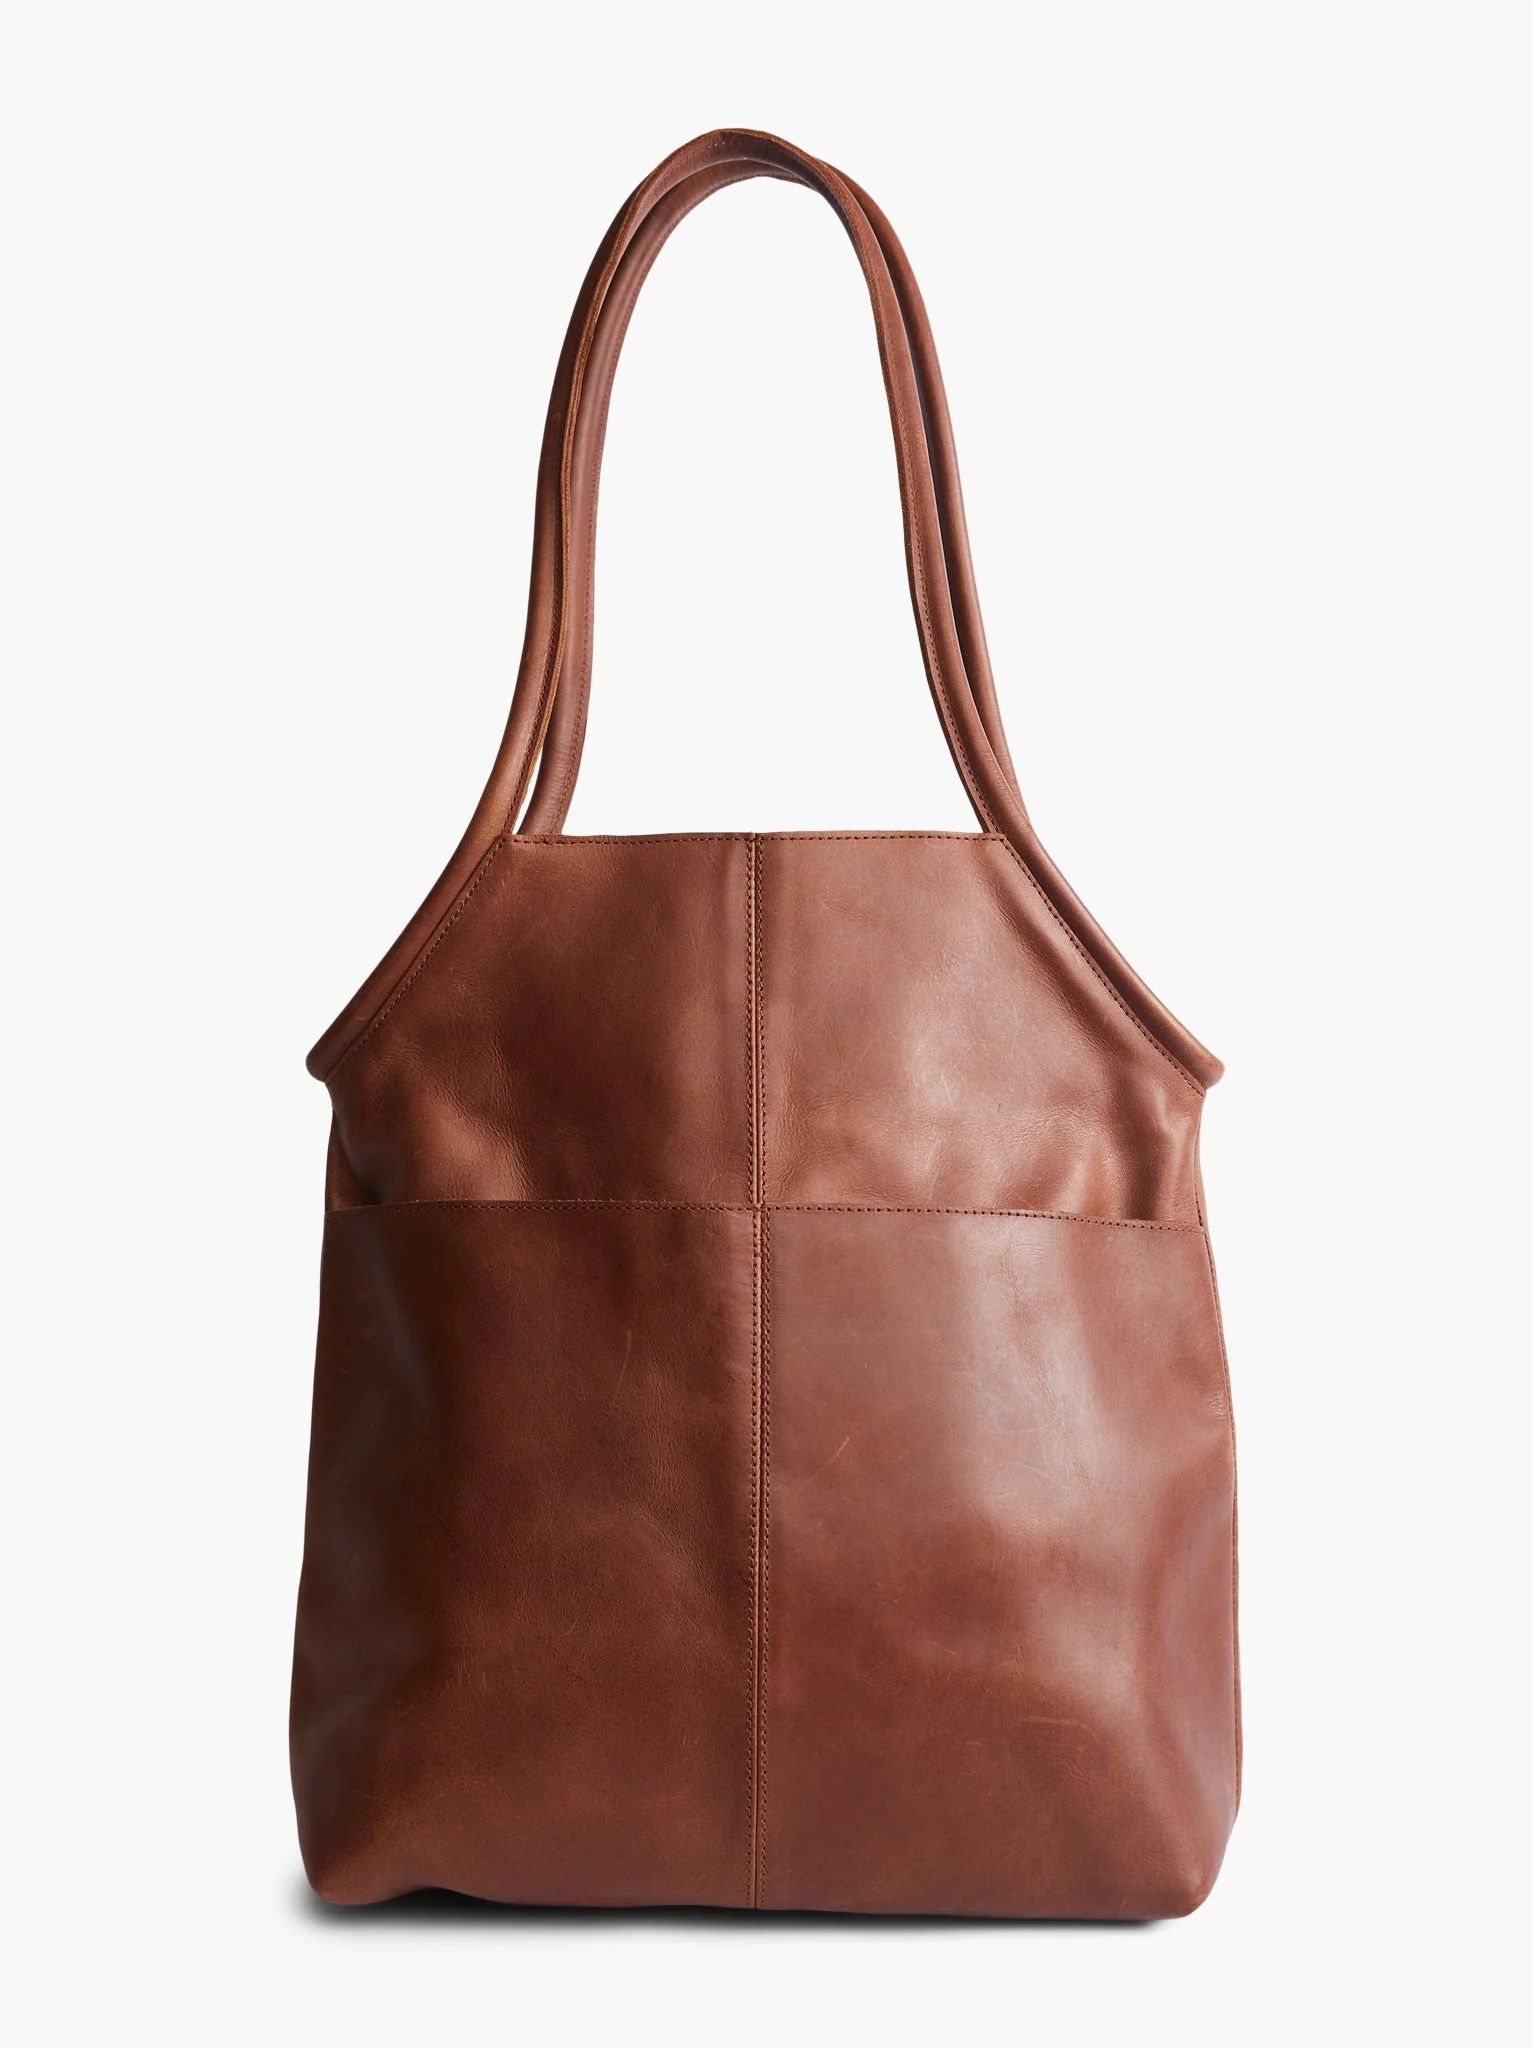 Meskel Tote | ABLE Clothing